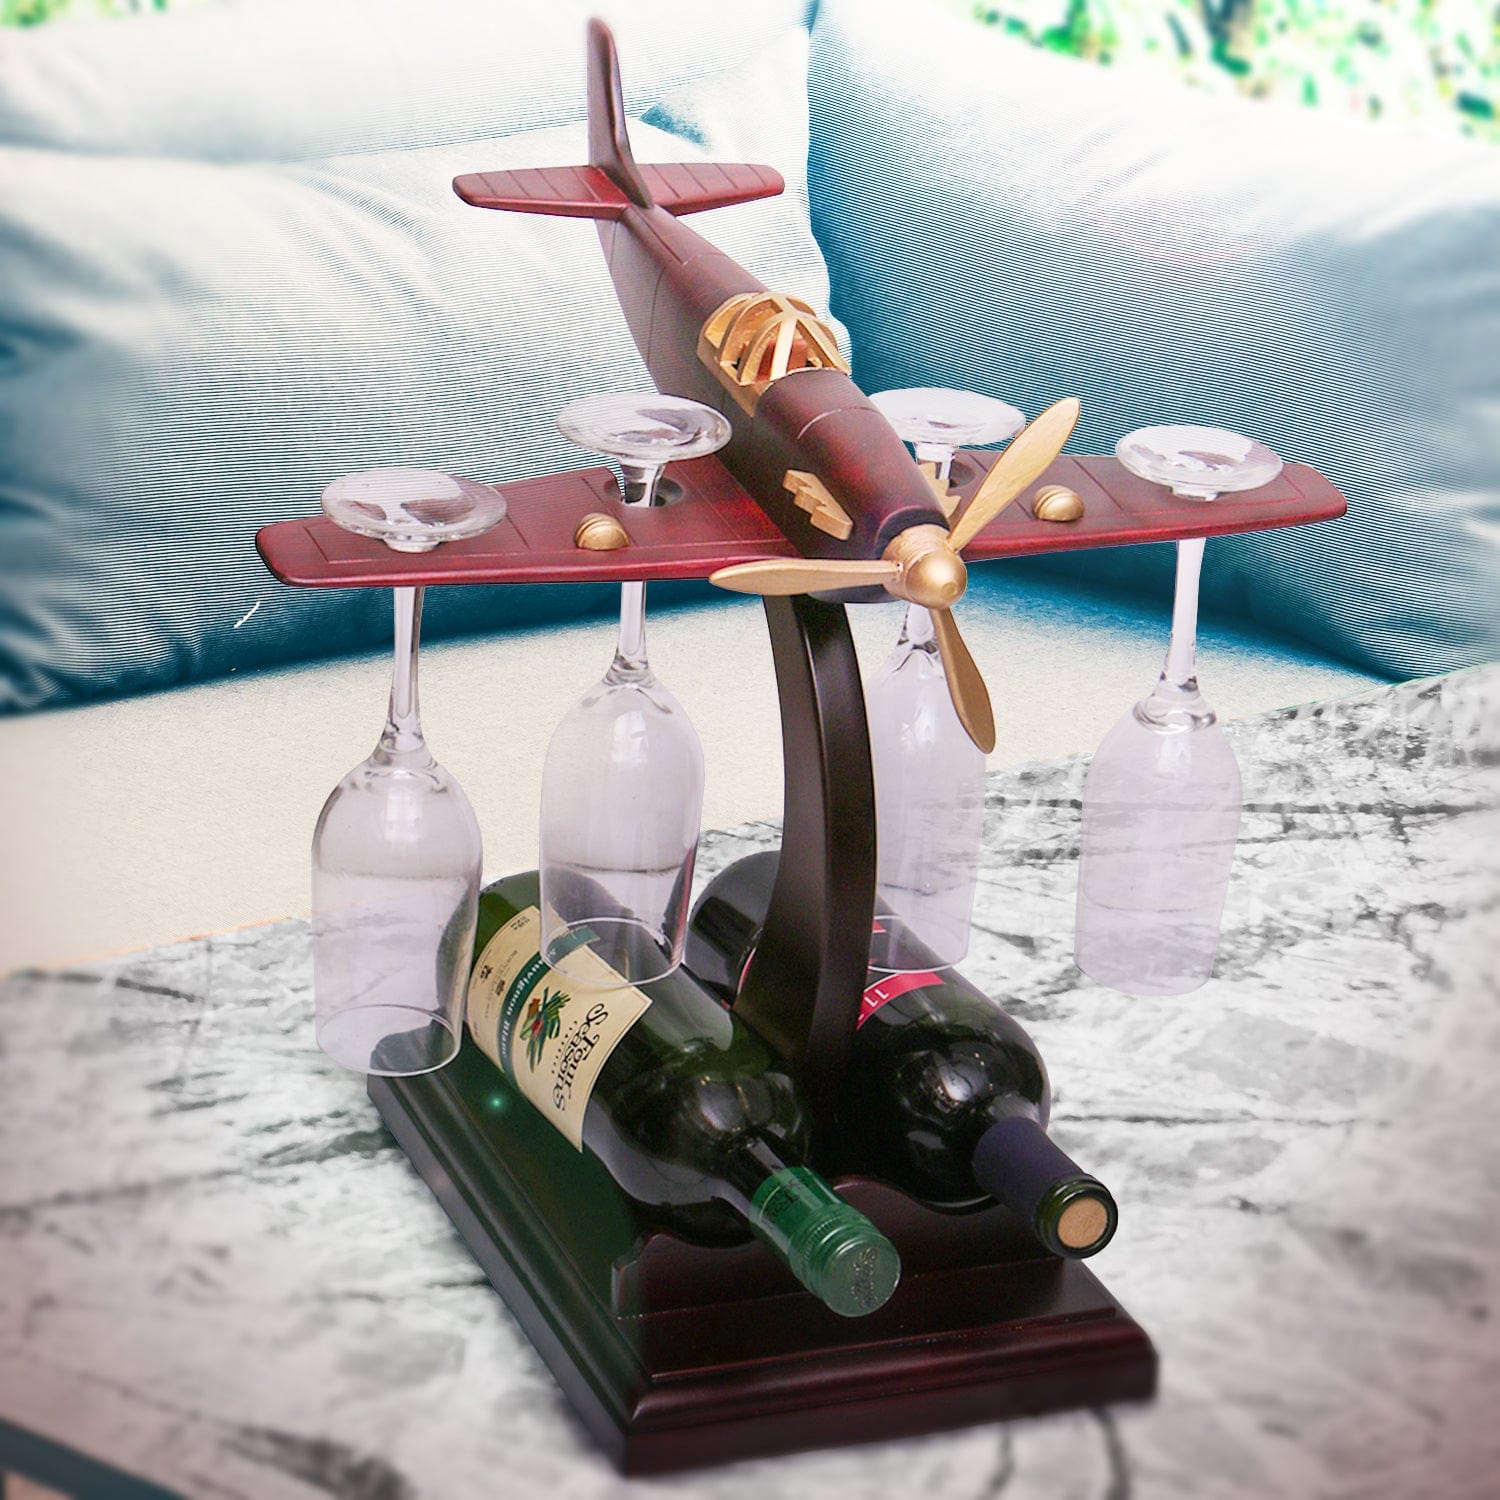 Red Butler Showpieces Decorative Wine Holder WHFA00W16Y18A1 DUFA16A1 Elevate Your Home Bar with Flying Airplane Wine Holder - Modern Decor Redbutler